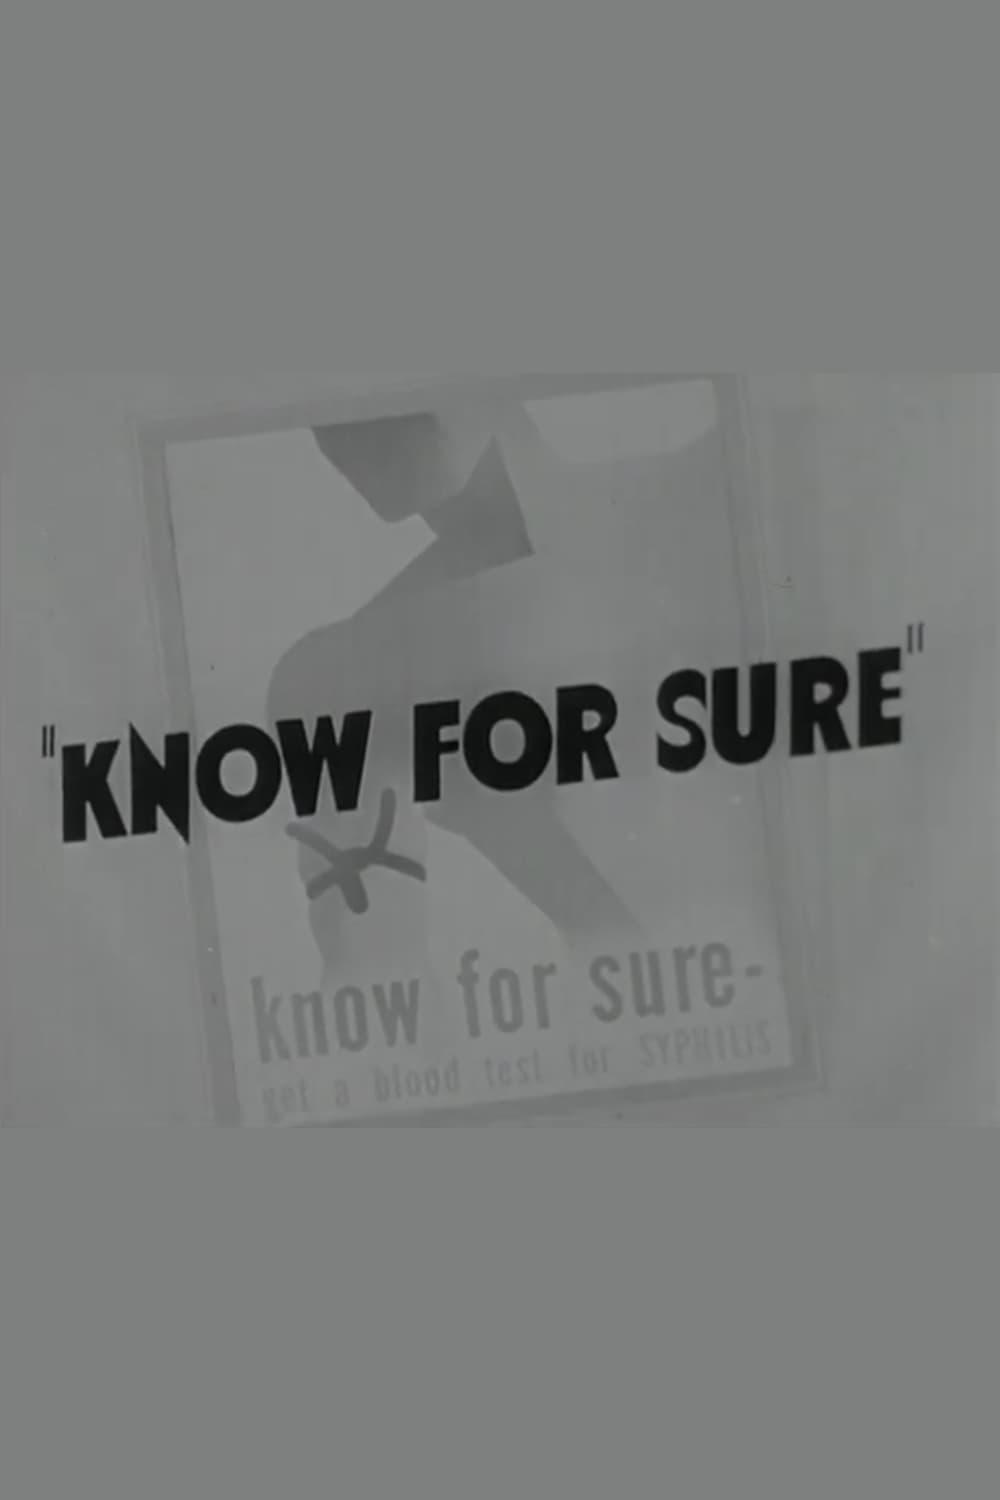 Know For Sure poster